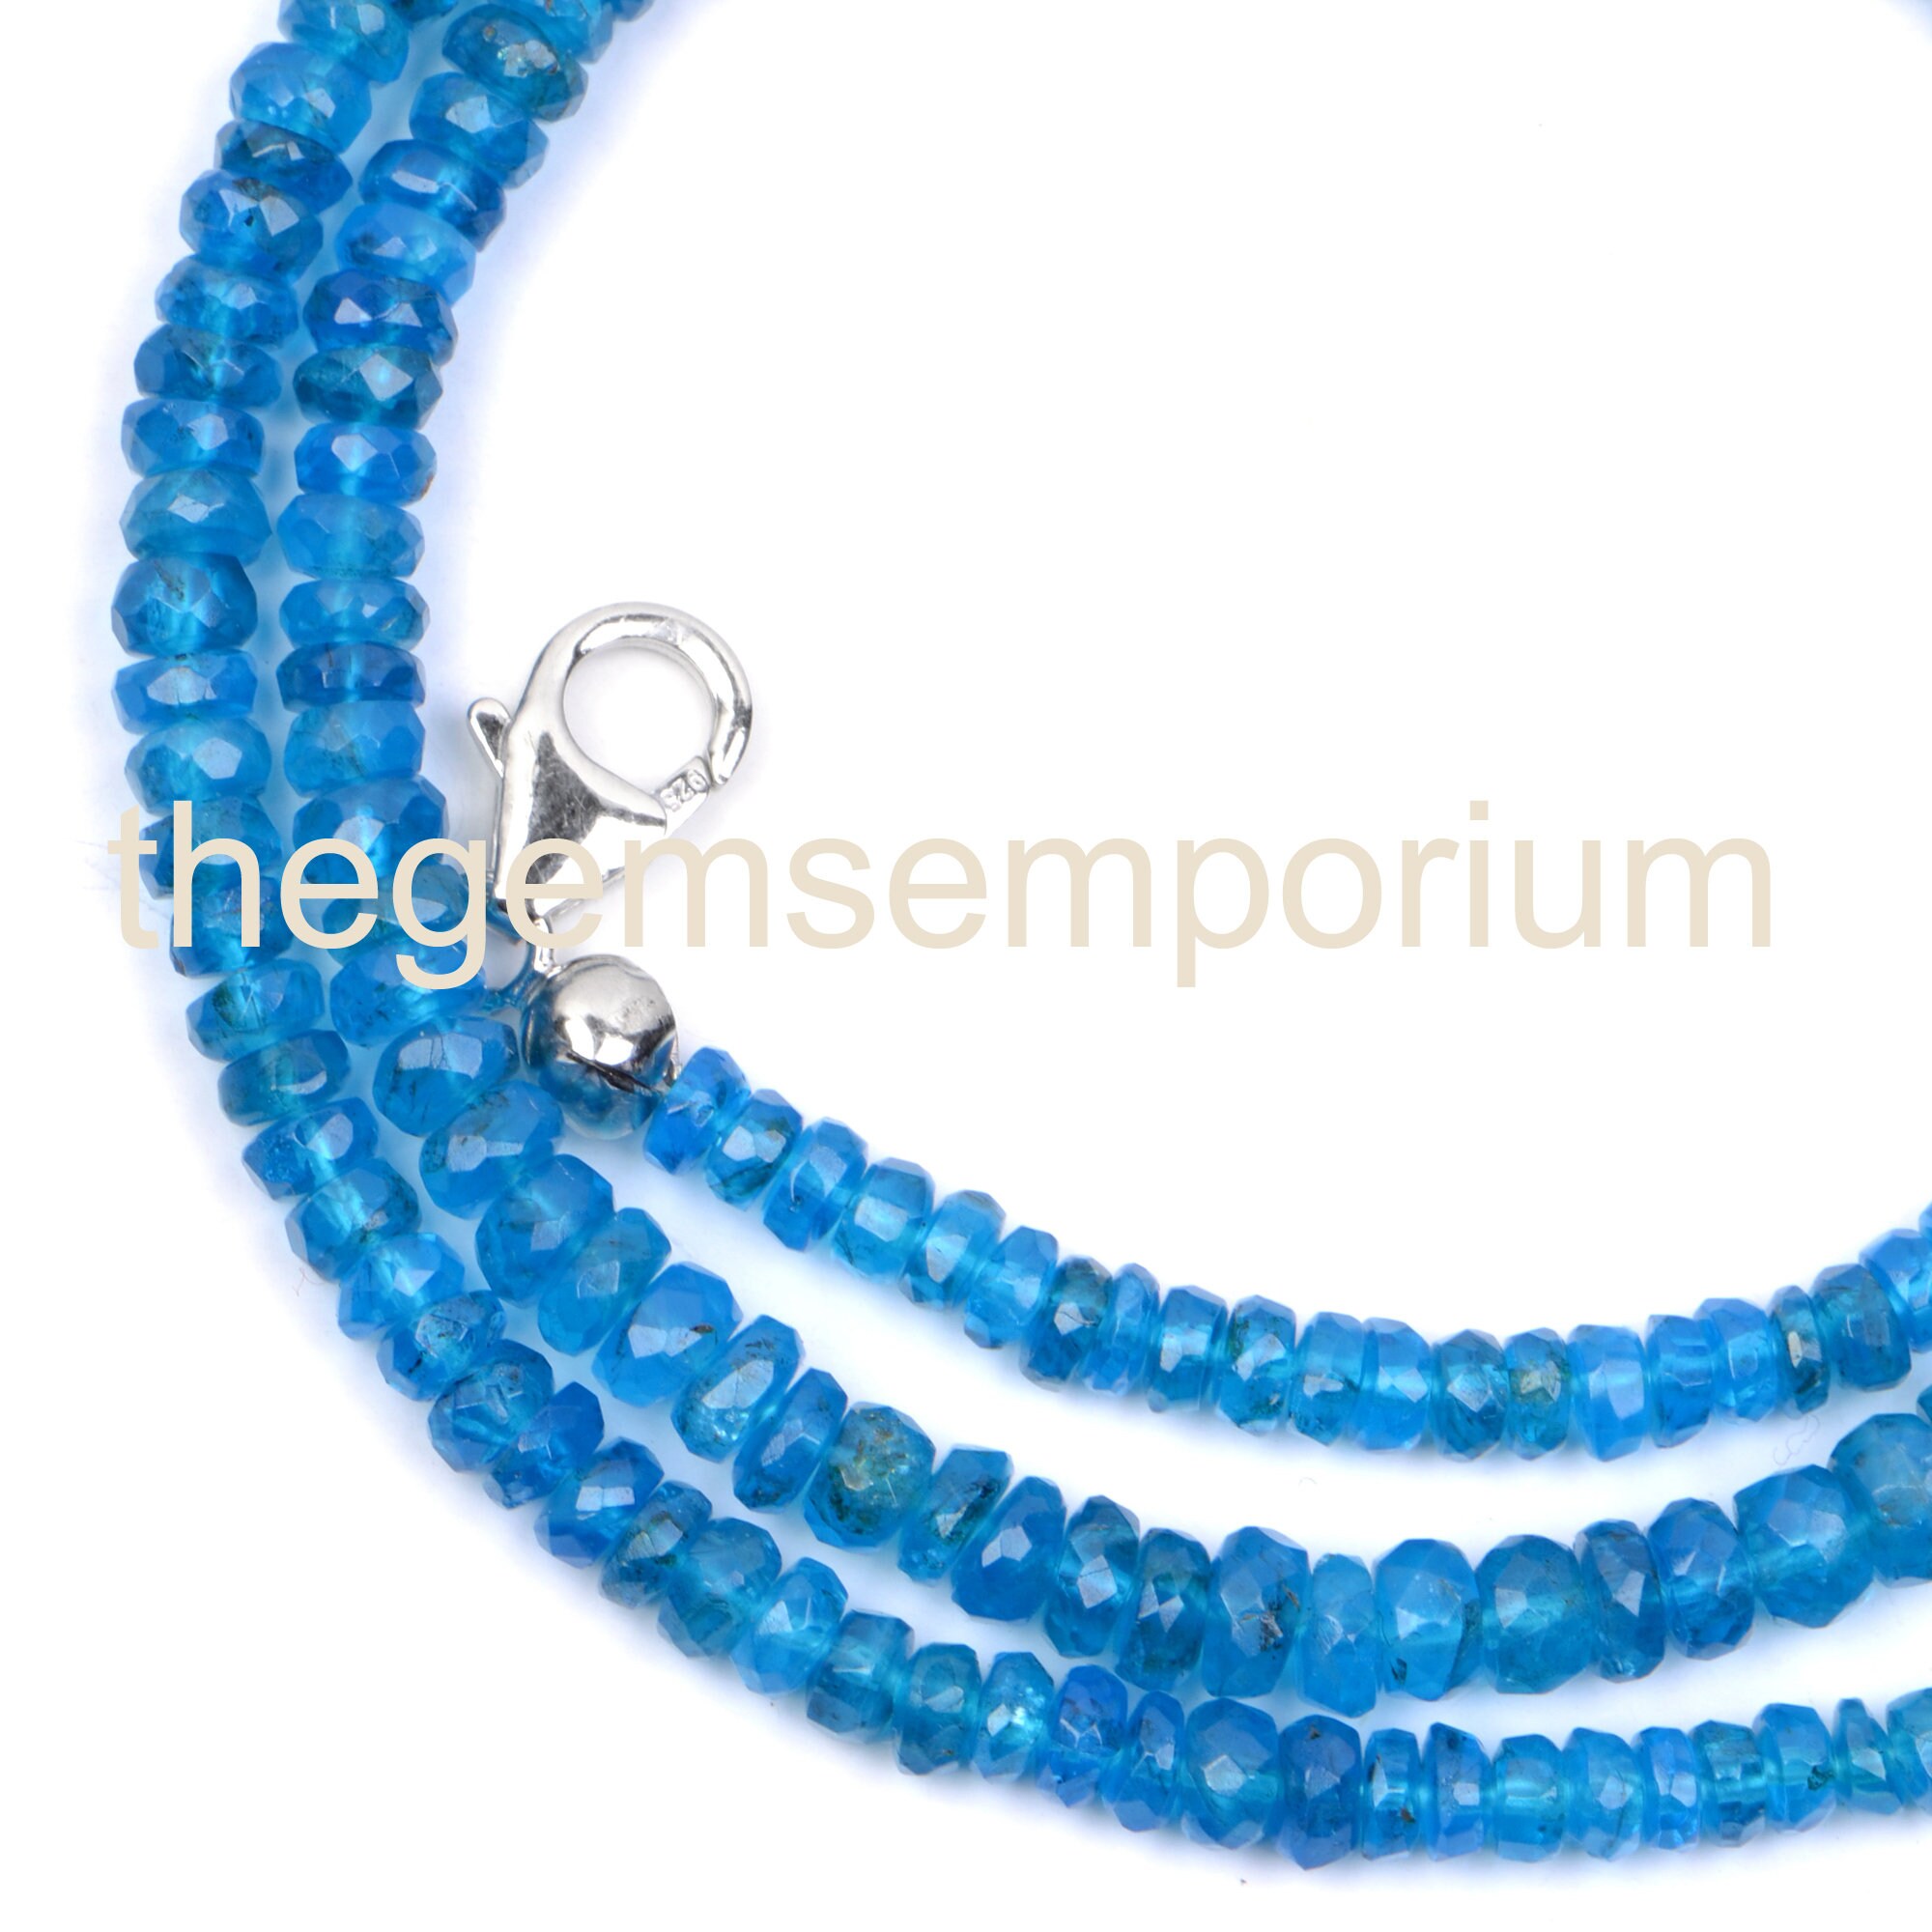 Neon Apatite Faceted Rondelle Necklace (3.5-5mm)with Silver Hook,neon Apatite Faceted Rondelle  Necklace Beads,neon Apatite Rondelle Beads